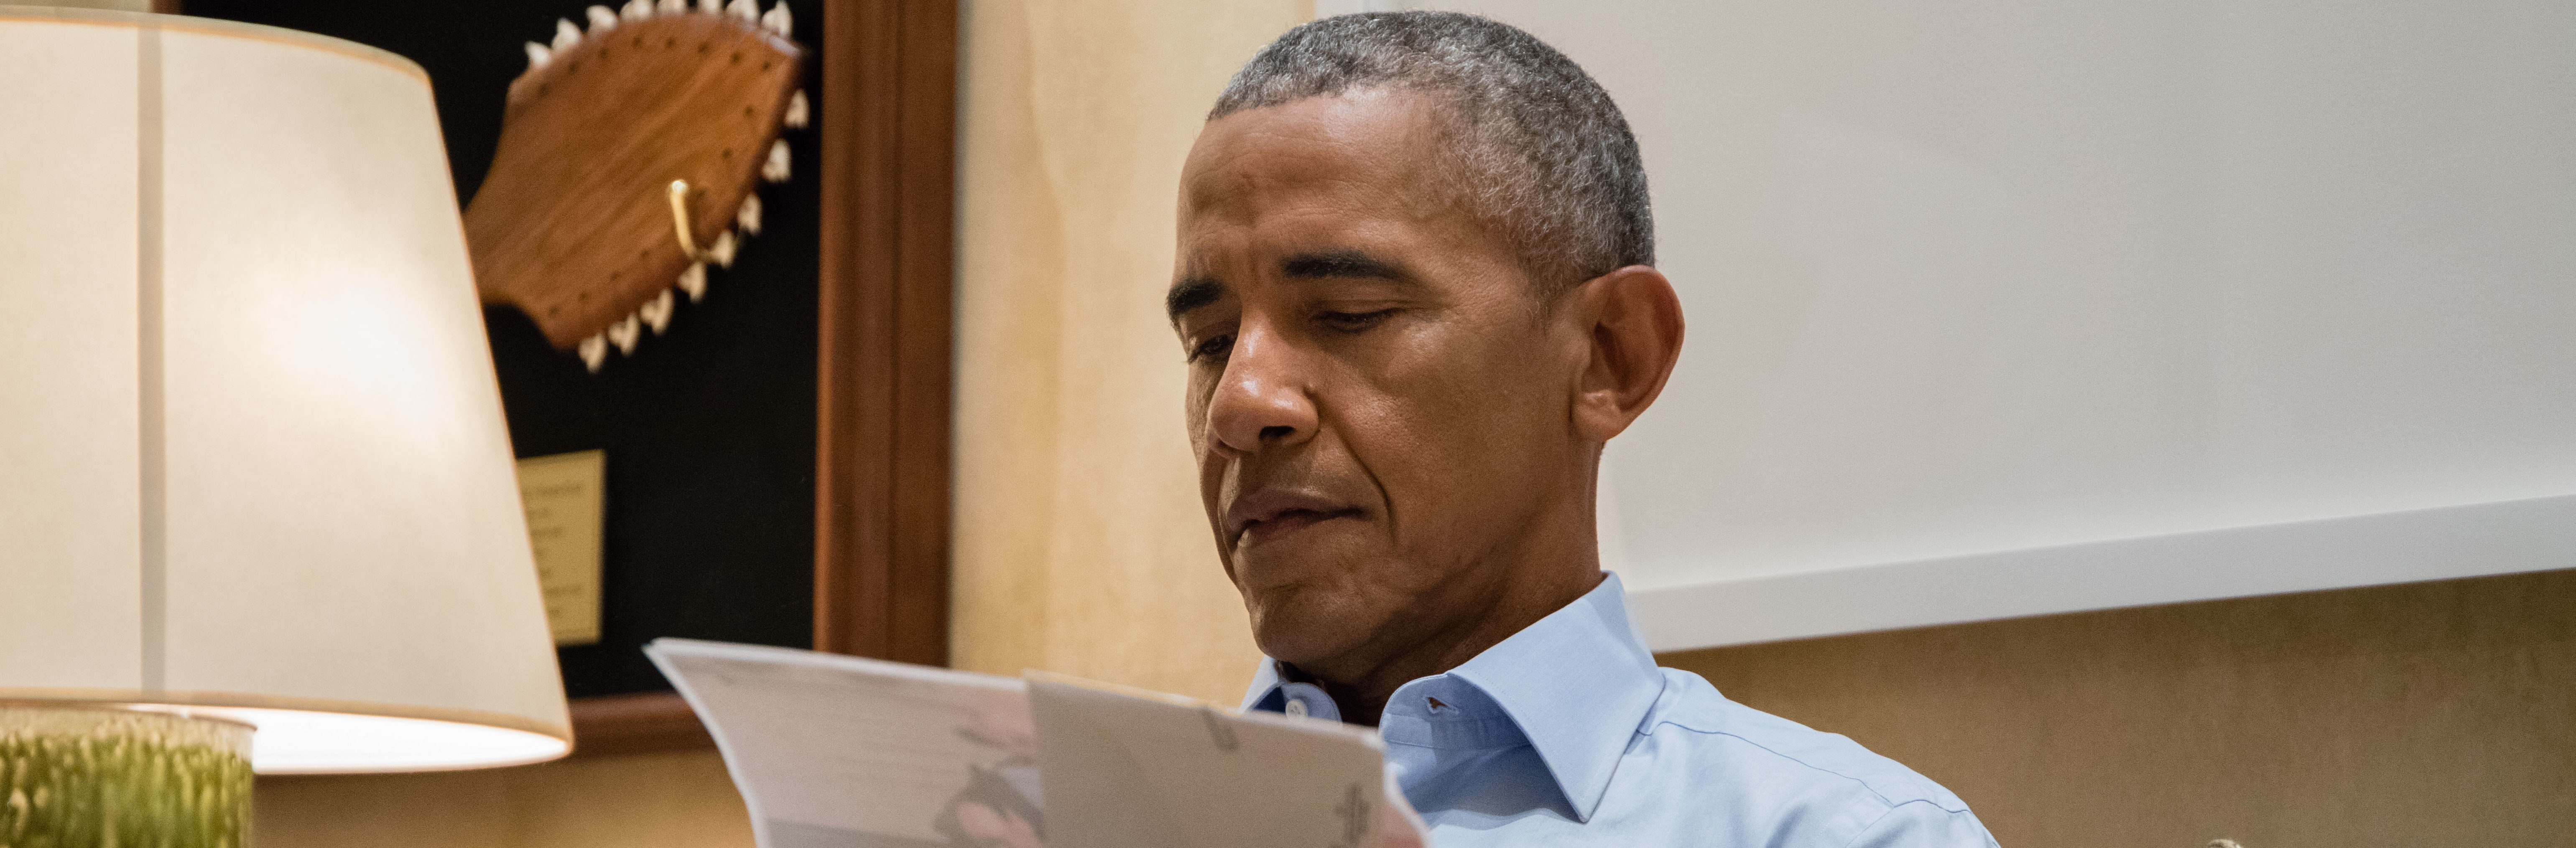 Former President Barack Obama reads public correspondence in his private office in Washington, DC Sept. 1, 2017.